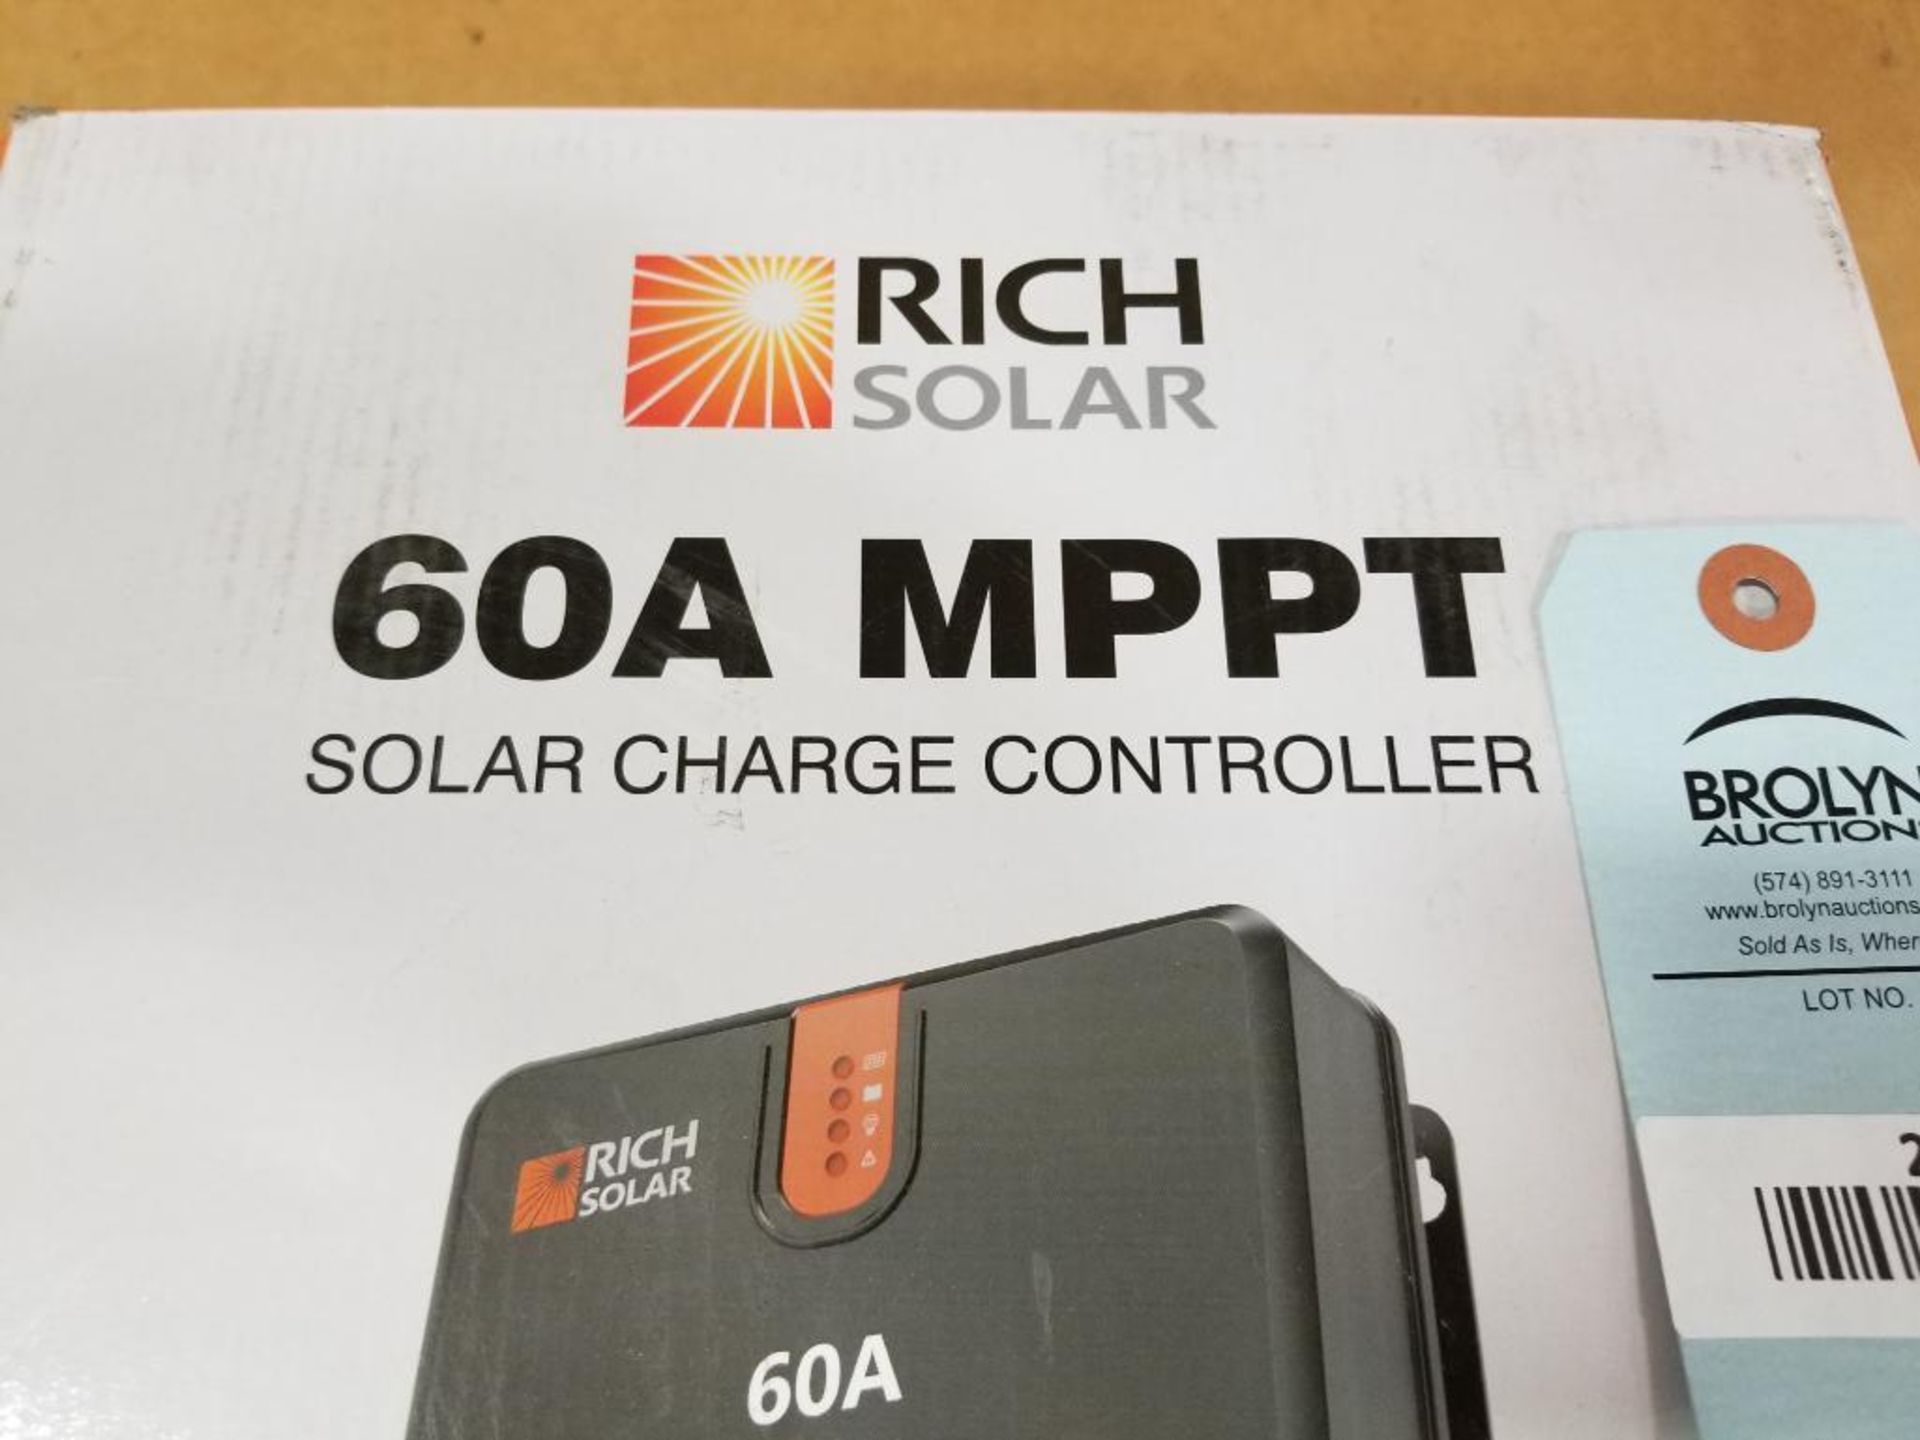 Rich Solar 60A MPPT solar charge controller. - Image 4 of 6